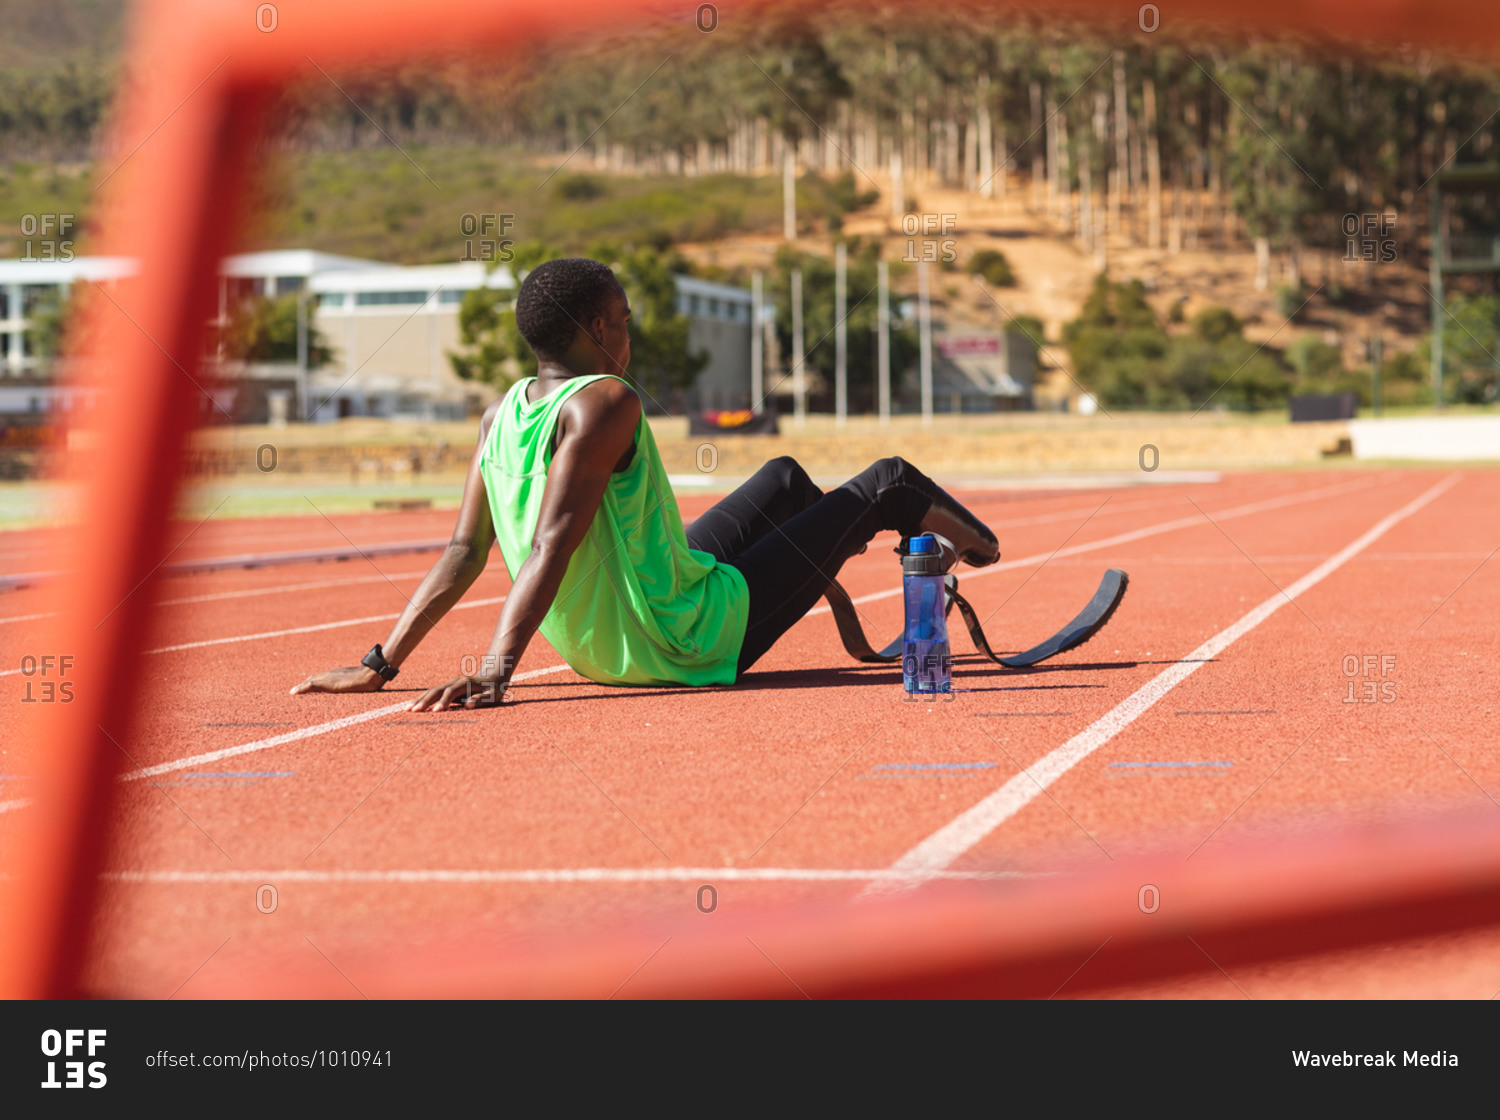 Fit, mixed race disabled male athlete at an outdoor sports stadium, sitting on race track after race with water bottle wearing running blades. Disability athletics sport training.